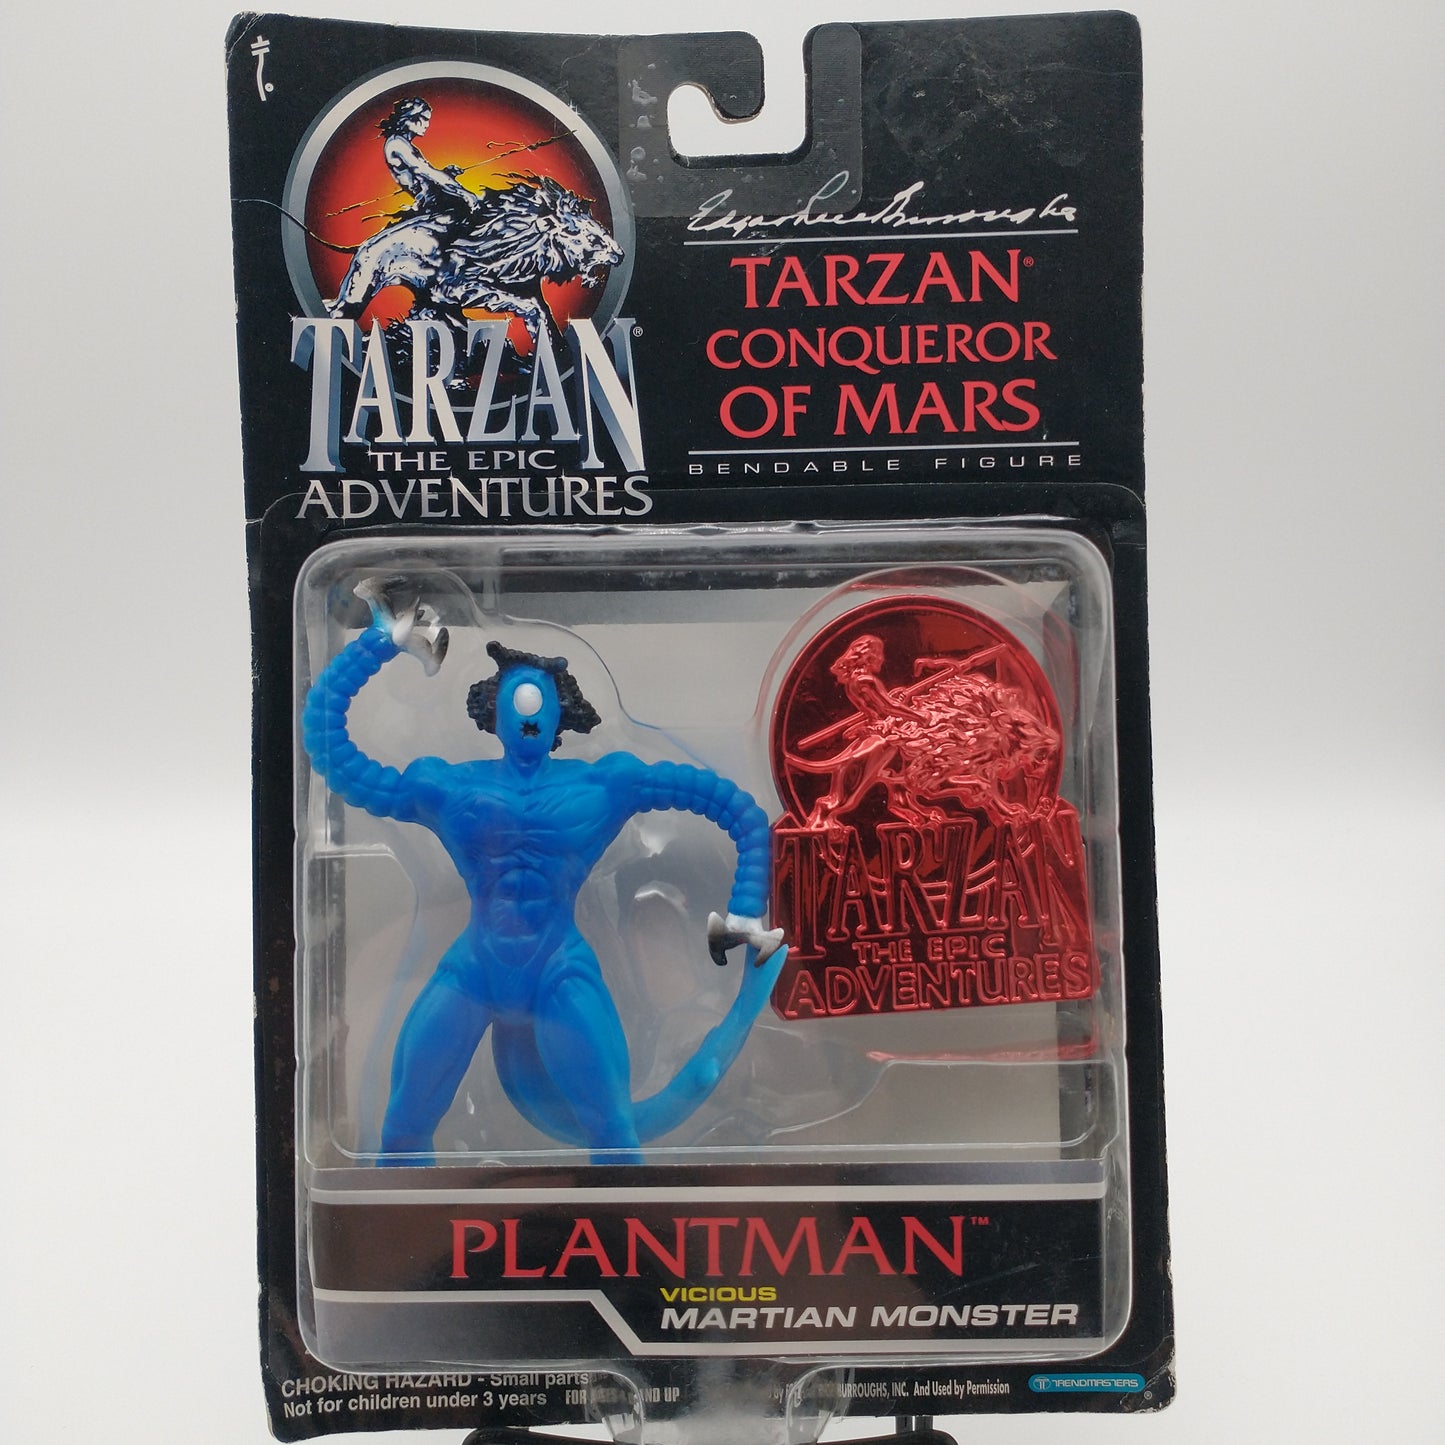 The front of the carton and bubble. Inside the bubble is the action figure planet man, which is blue and has black hair, a single eye, and has clawed hands and a tail. There is a red chrome medallion to the right of the figure.